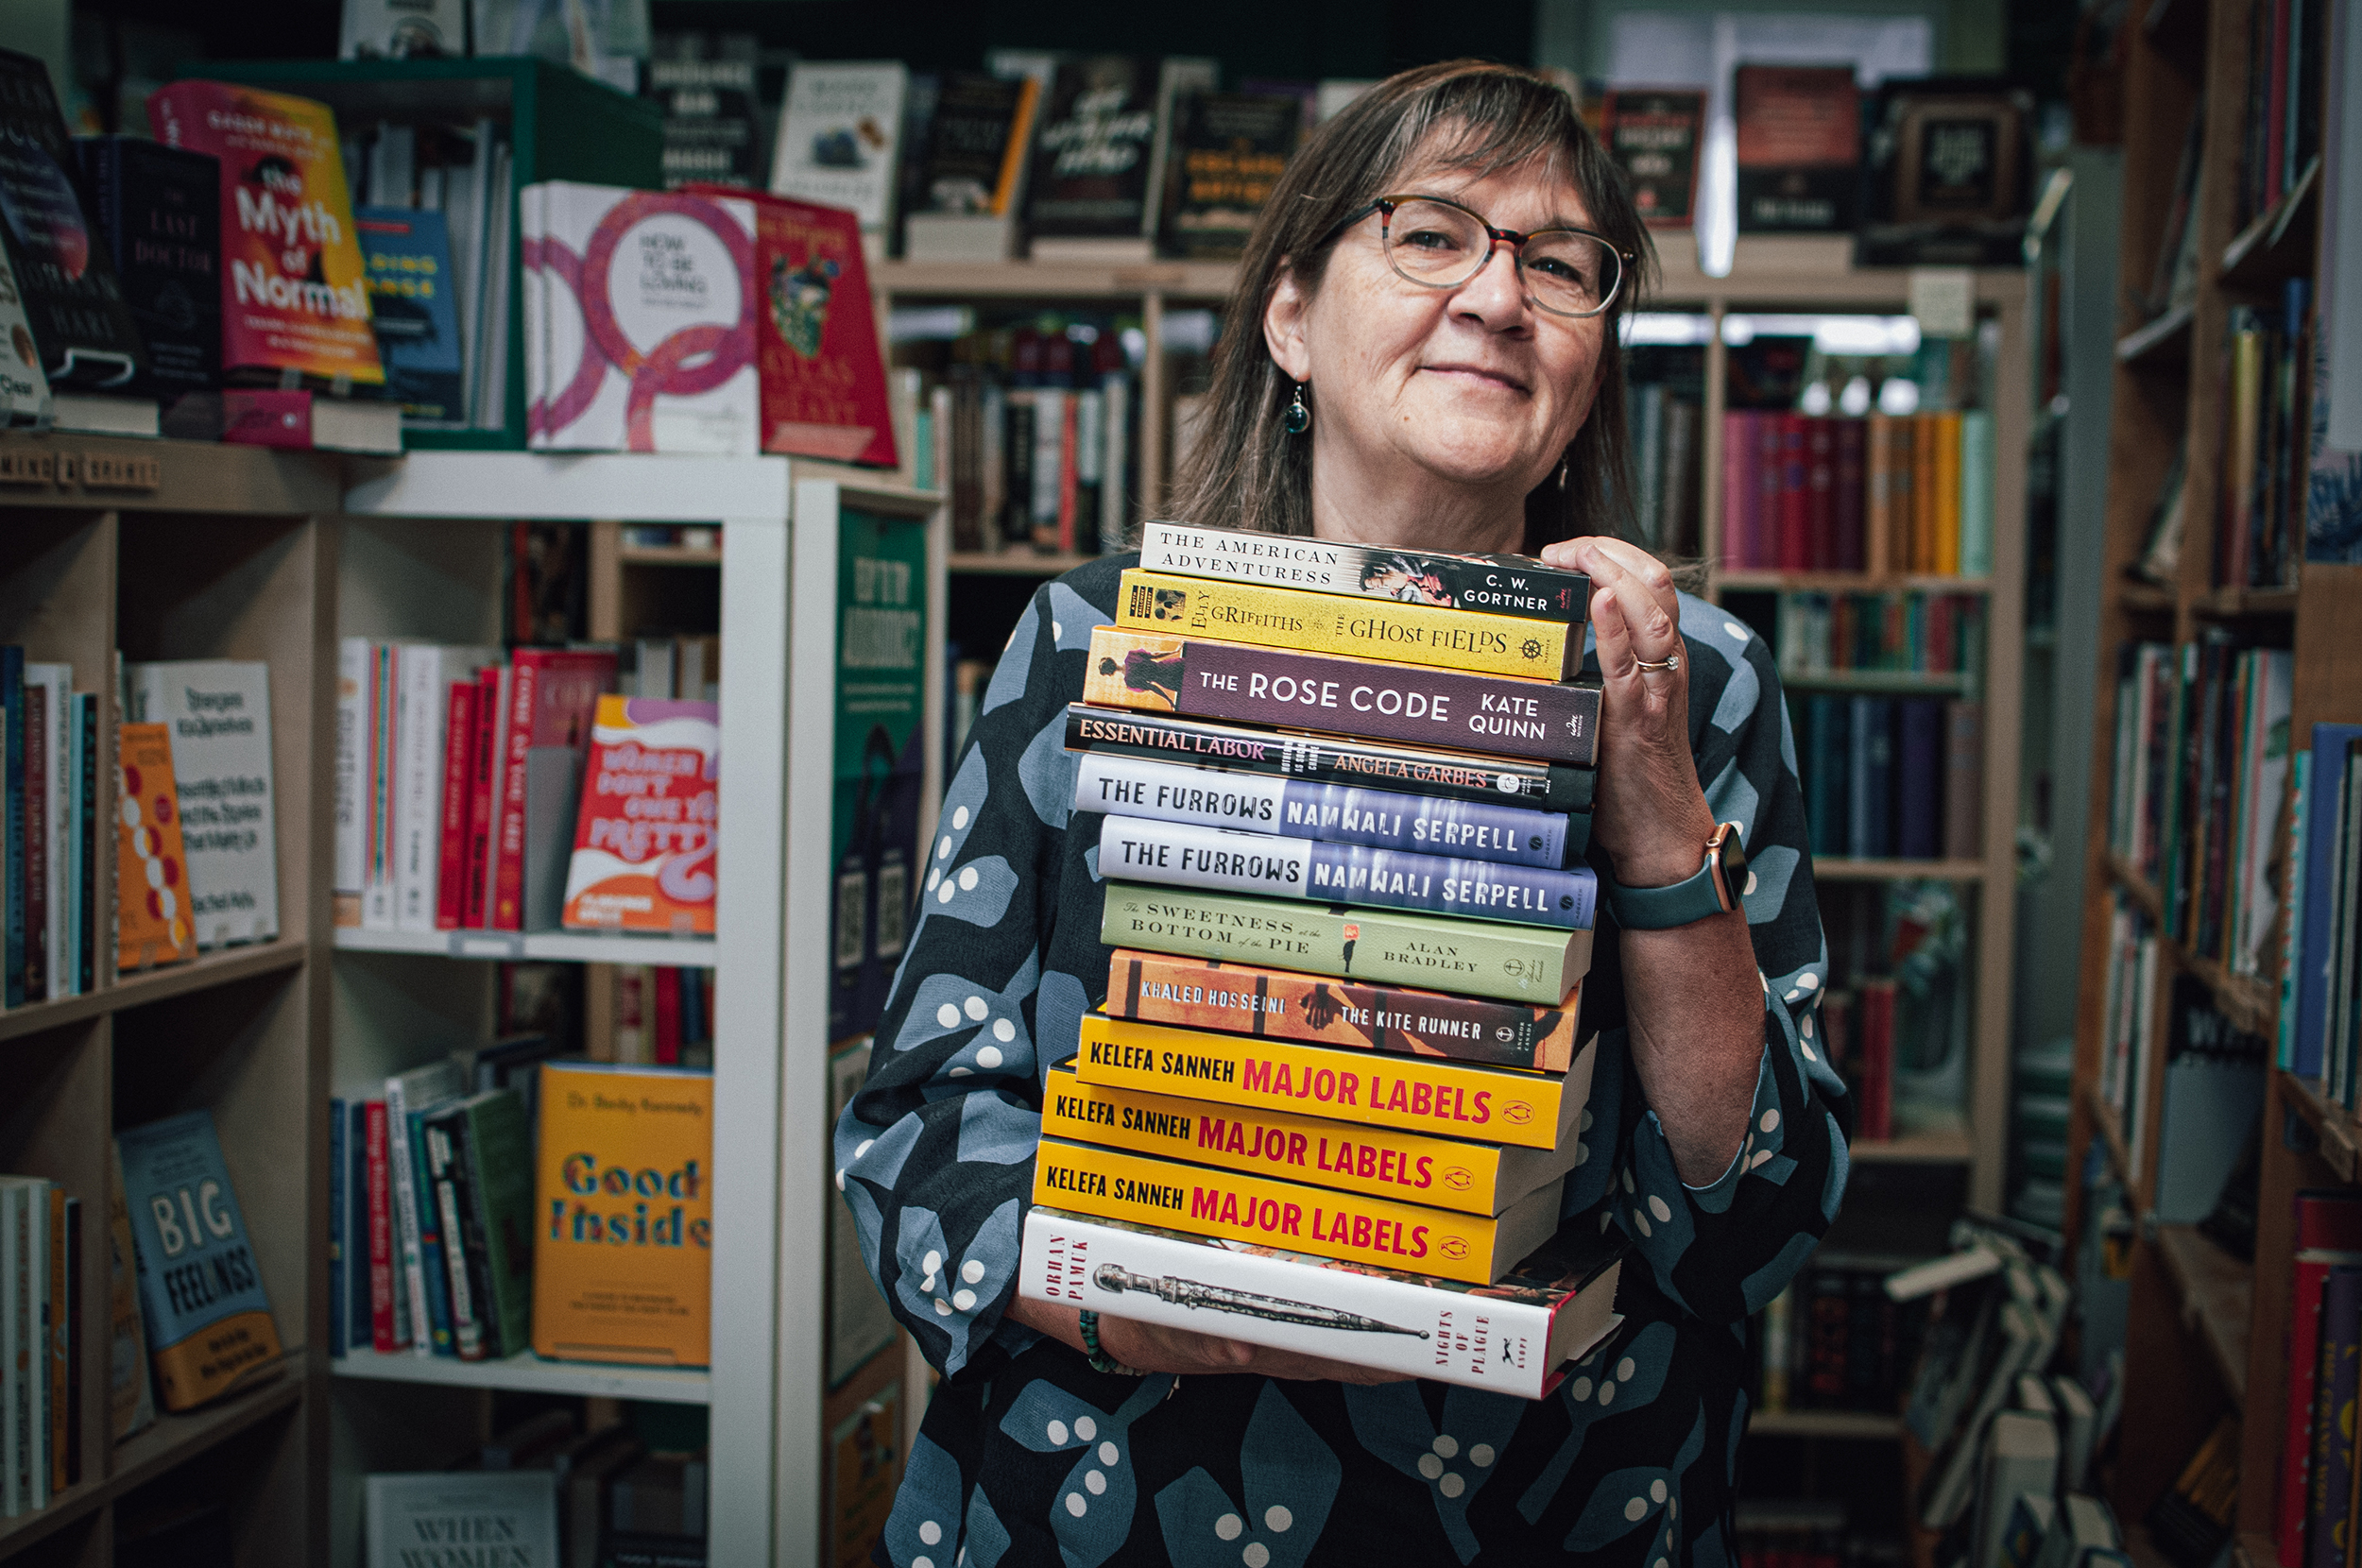 Ann Shea, Owner of Mill Street Books, holds a stack of books.